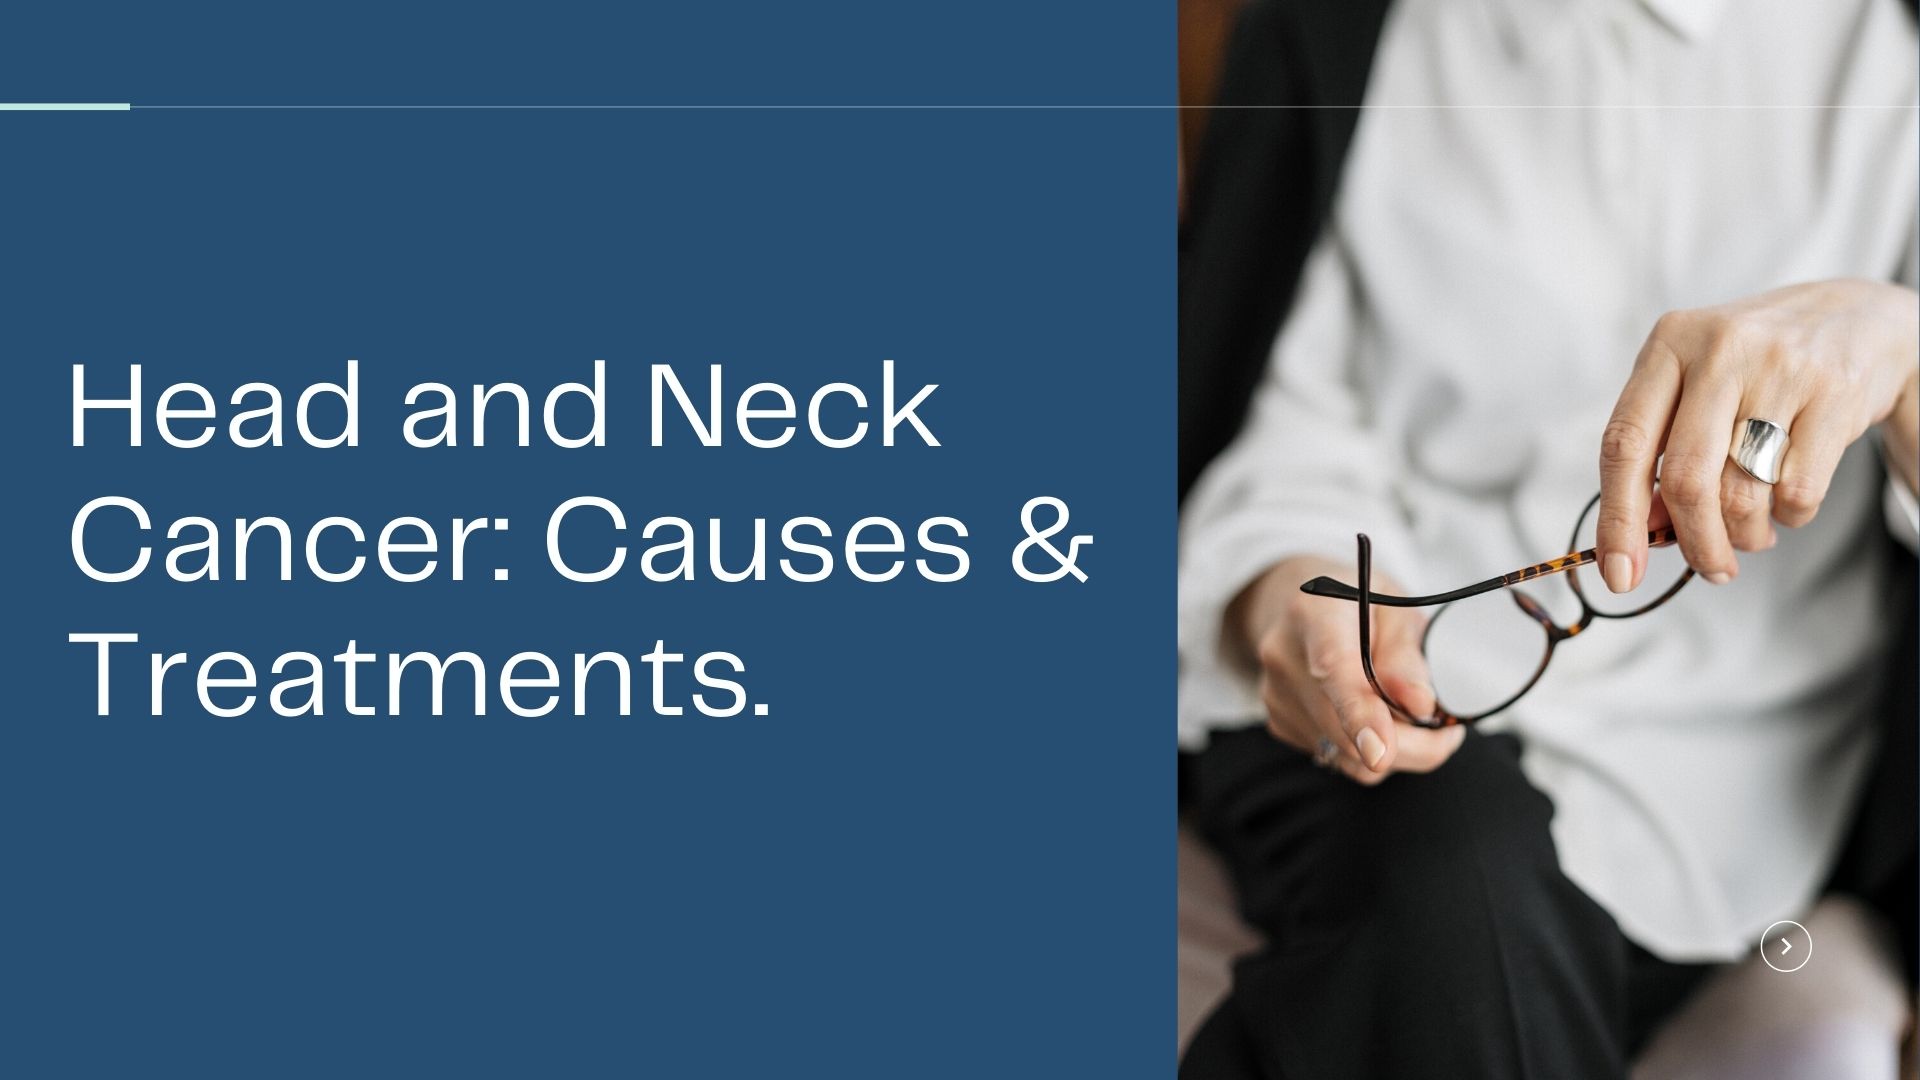 Head and Neck Cancer: Causes & Treatments.